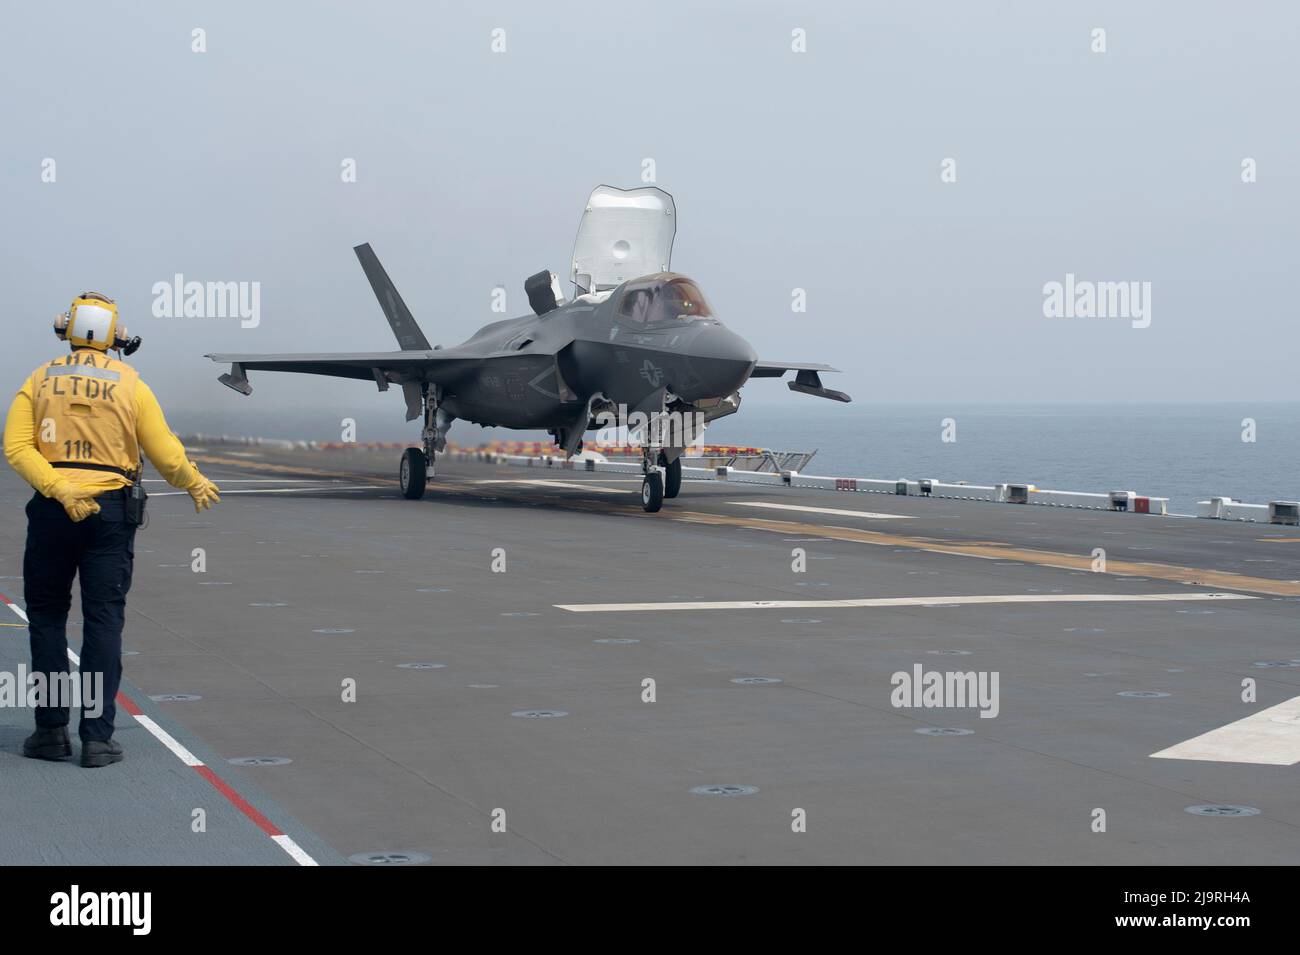 220524-N-XN177-1081 PACIFIC OCEAN (May 24, 2022) – An F-35B Lightning II aircraft assigned to Marine Fighter Attack Squadron (VMFA) 121 lands aboard amphibious assault carrier USS Tripoli (LHA 7), May 24, 2022. Tripoli is conducting routine operations in U.S. 7th Fleet. (U.S. Navy photo by Mass Communication Specialist 1st Class Peter Burghart) Stock Photo